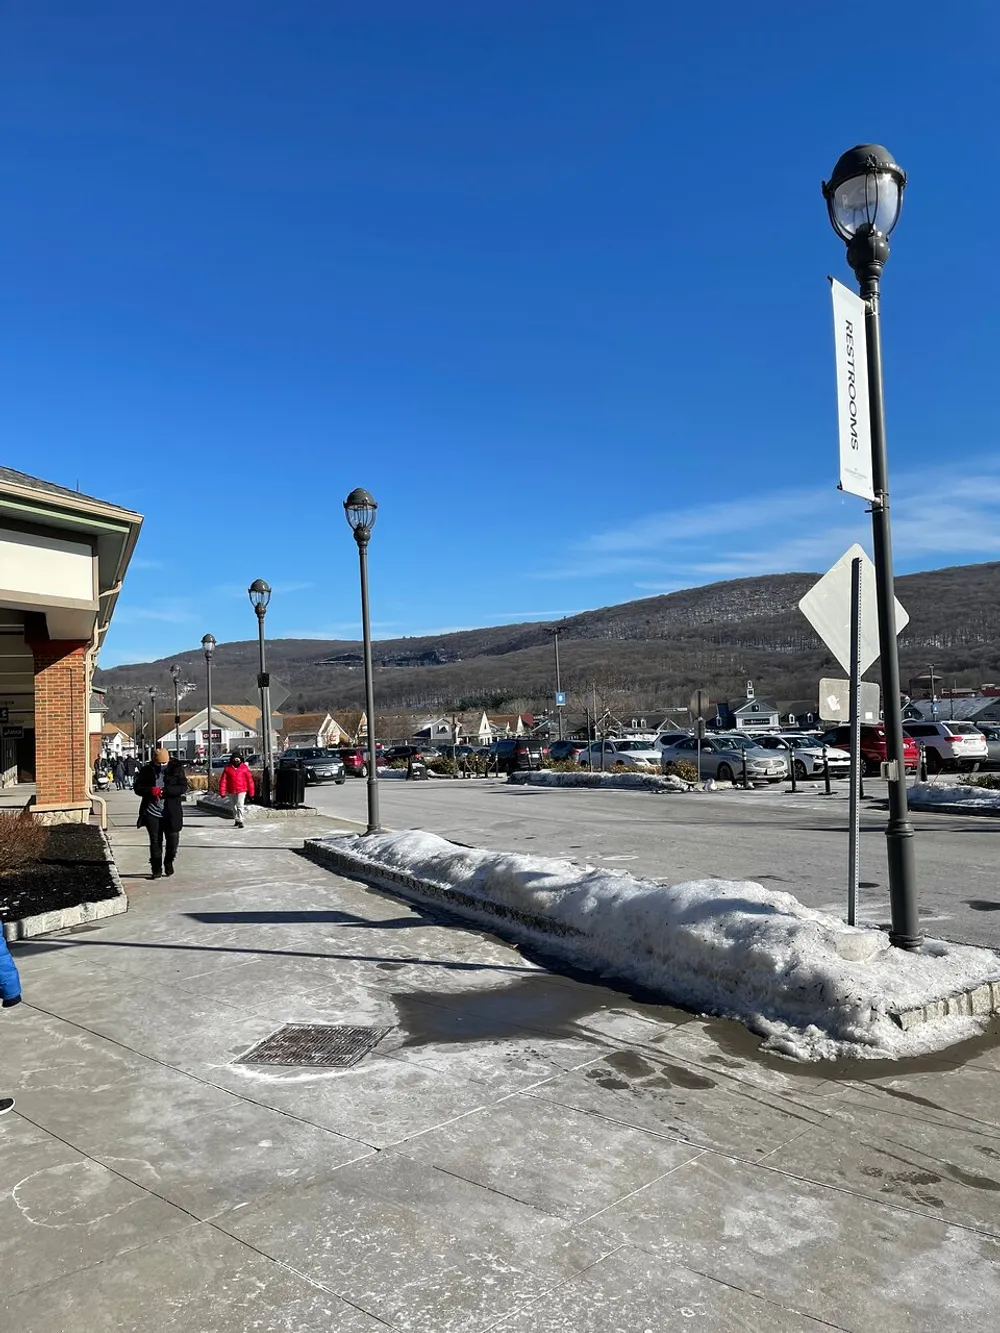 The image shows a sunny day with clear blue skies over a paved area with some snow on the ground street lamps and a sign pointing to restrooms with hills in the distance and people walking nearby